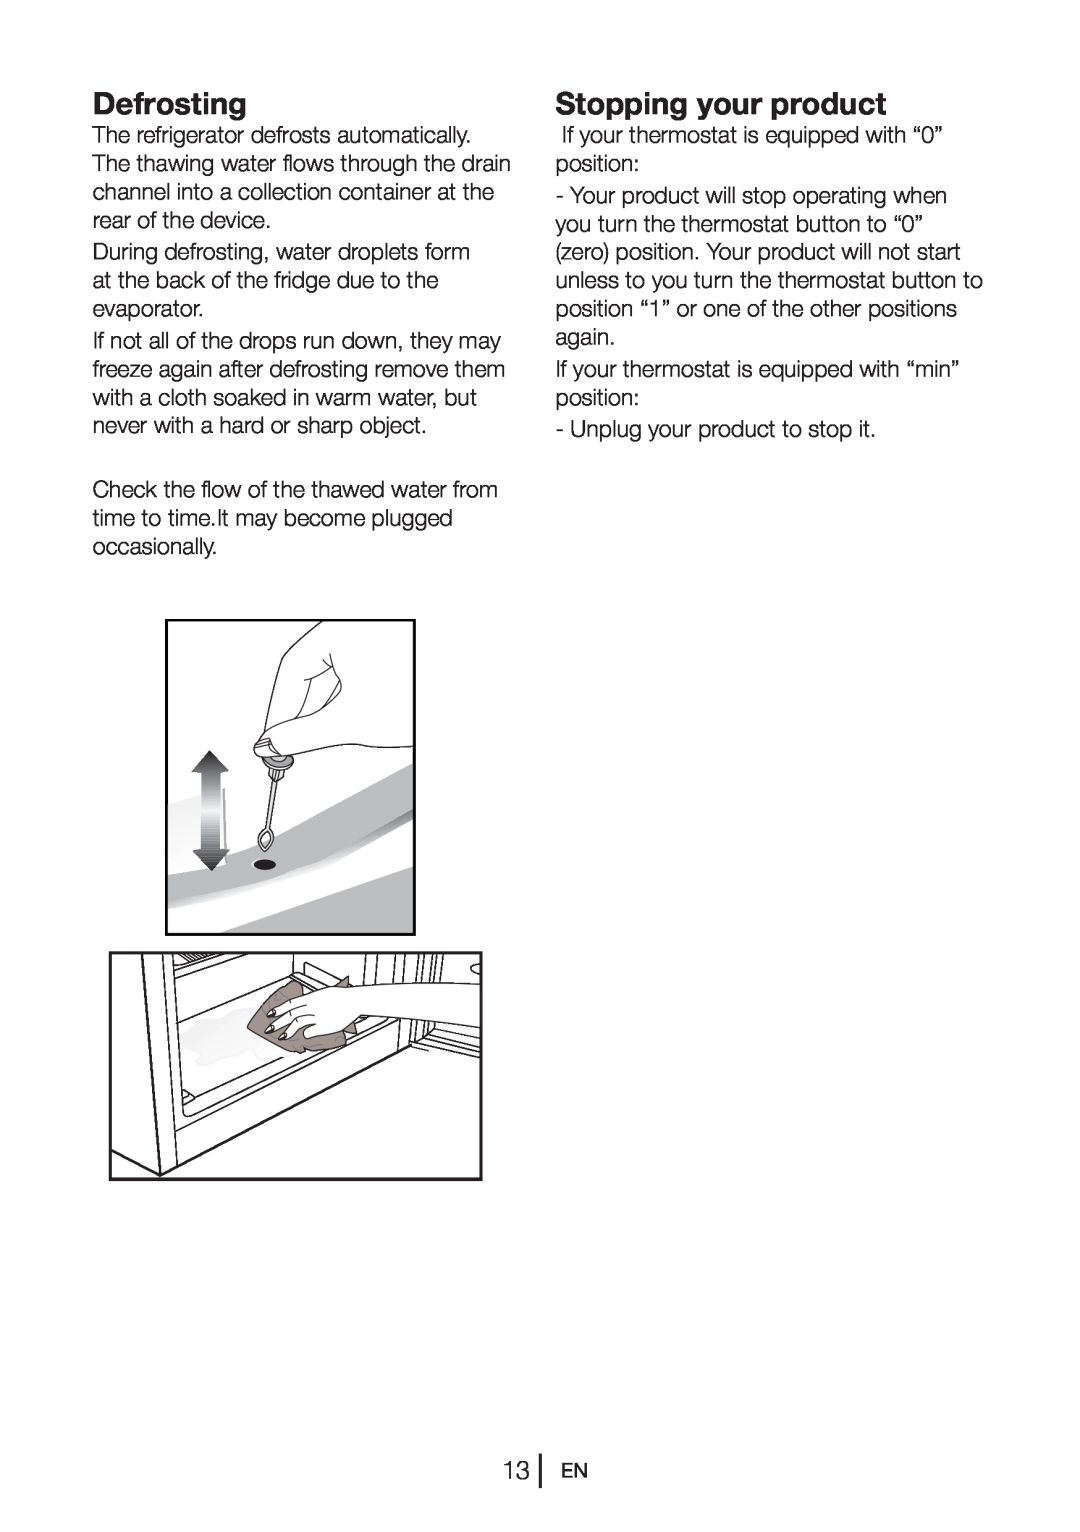 Beko UL483APW manual Defrosting, Stopping your product 